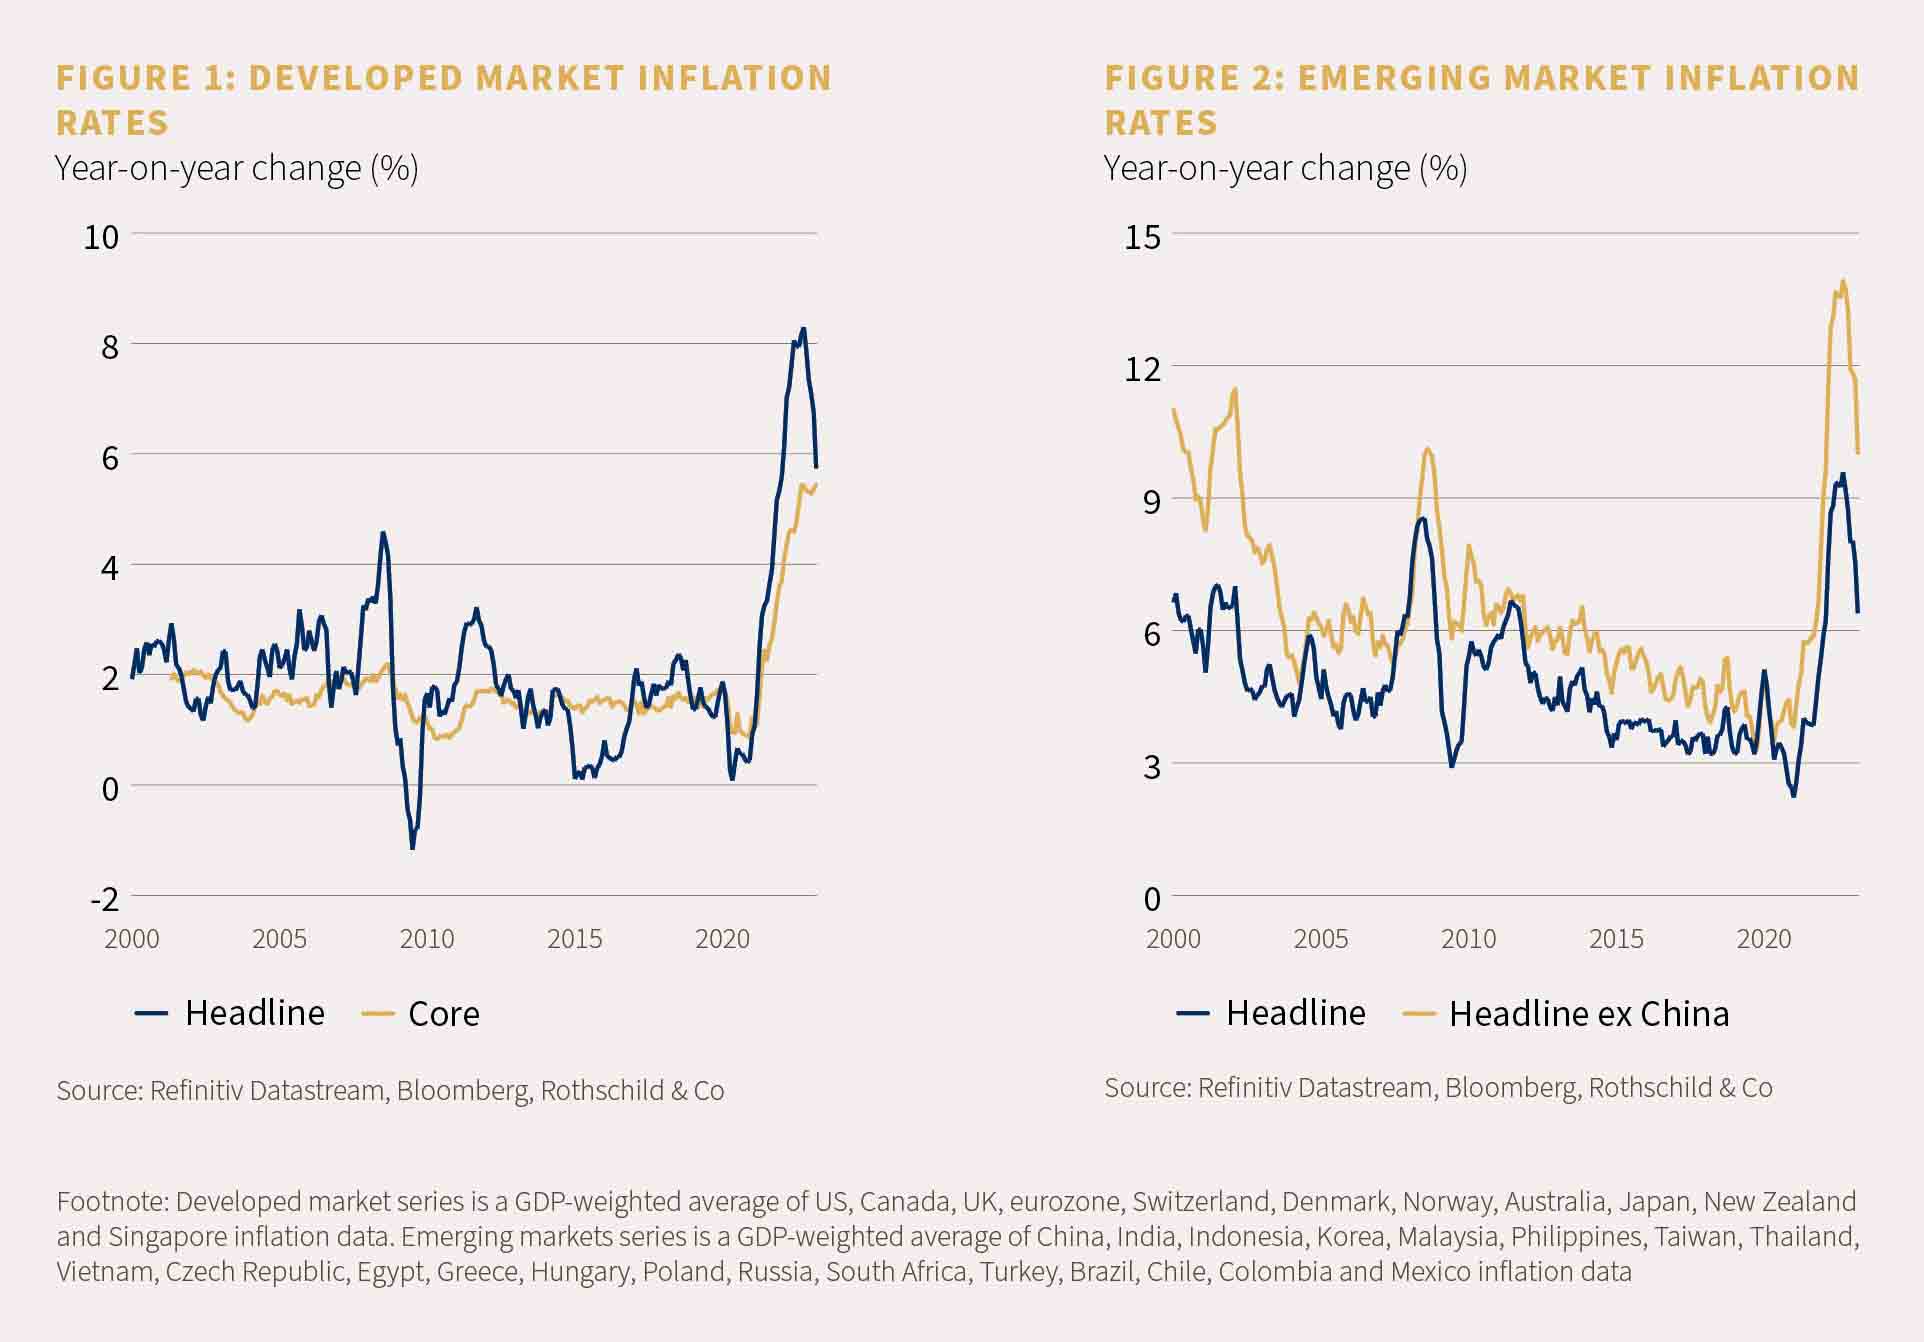 Chart showing developed market inflation rates and chart showing emerging market inflation rates